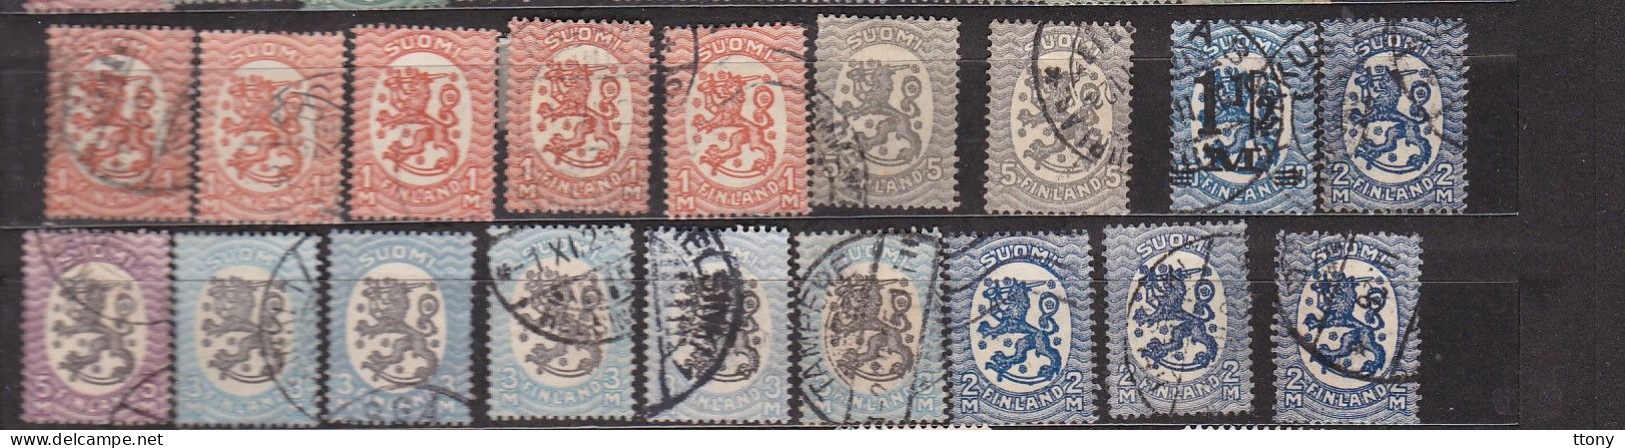 84  Timbres Oblitérés    Finlande Finland   Suomi  Certains Administration  Russe - Used Stamps